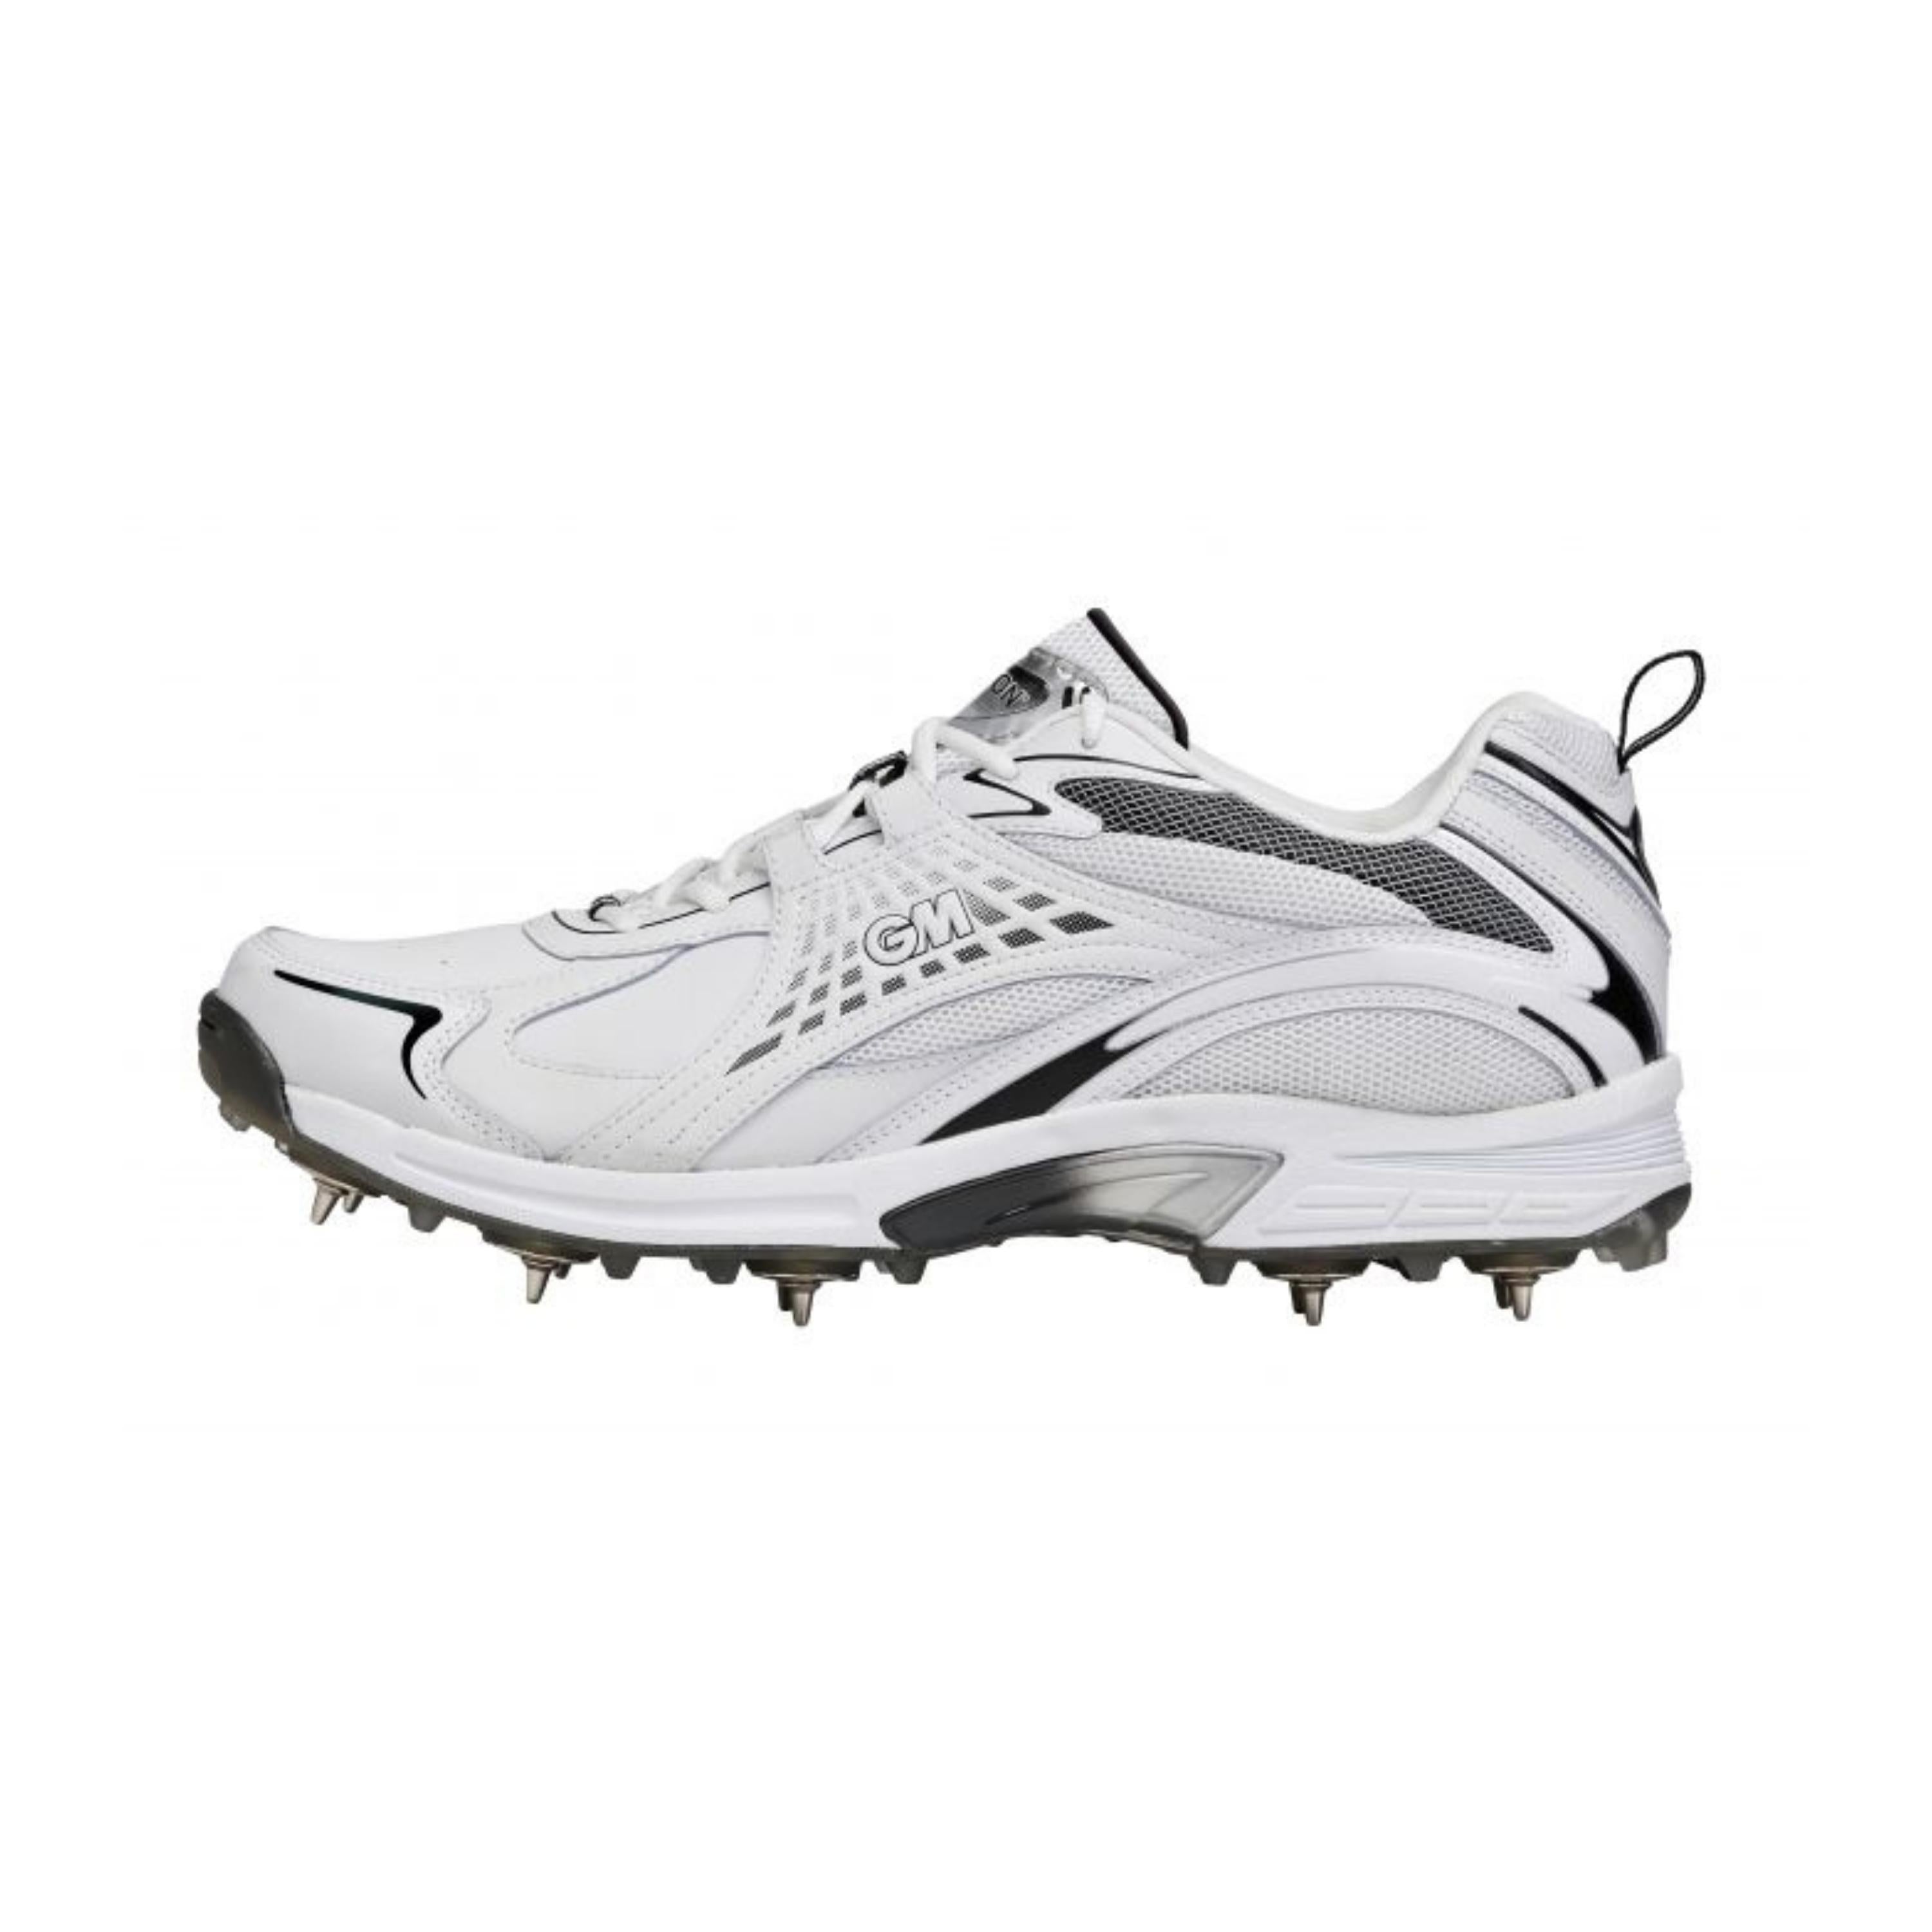 GM Cricket Shoes, Model Icon Multi Function